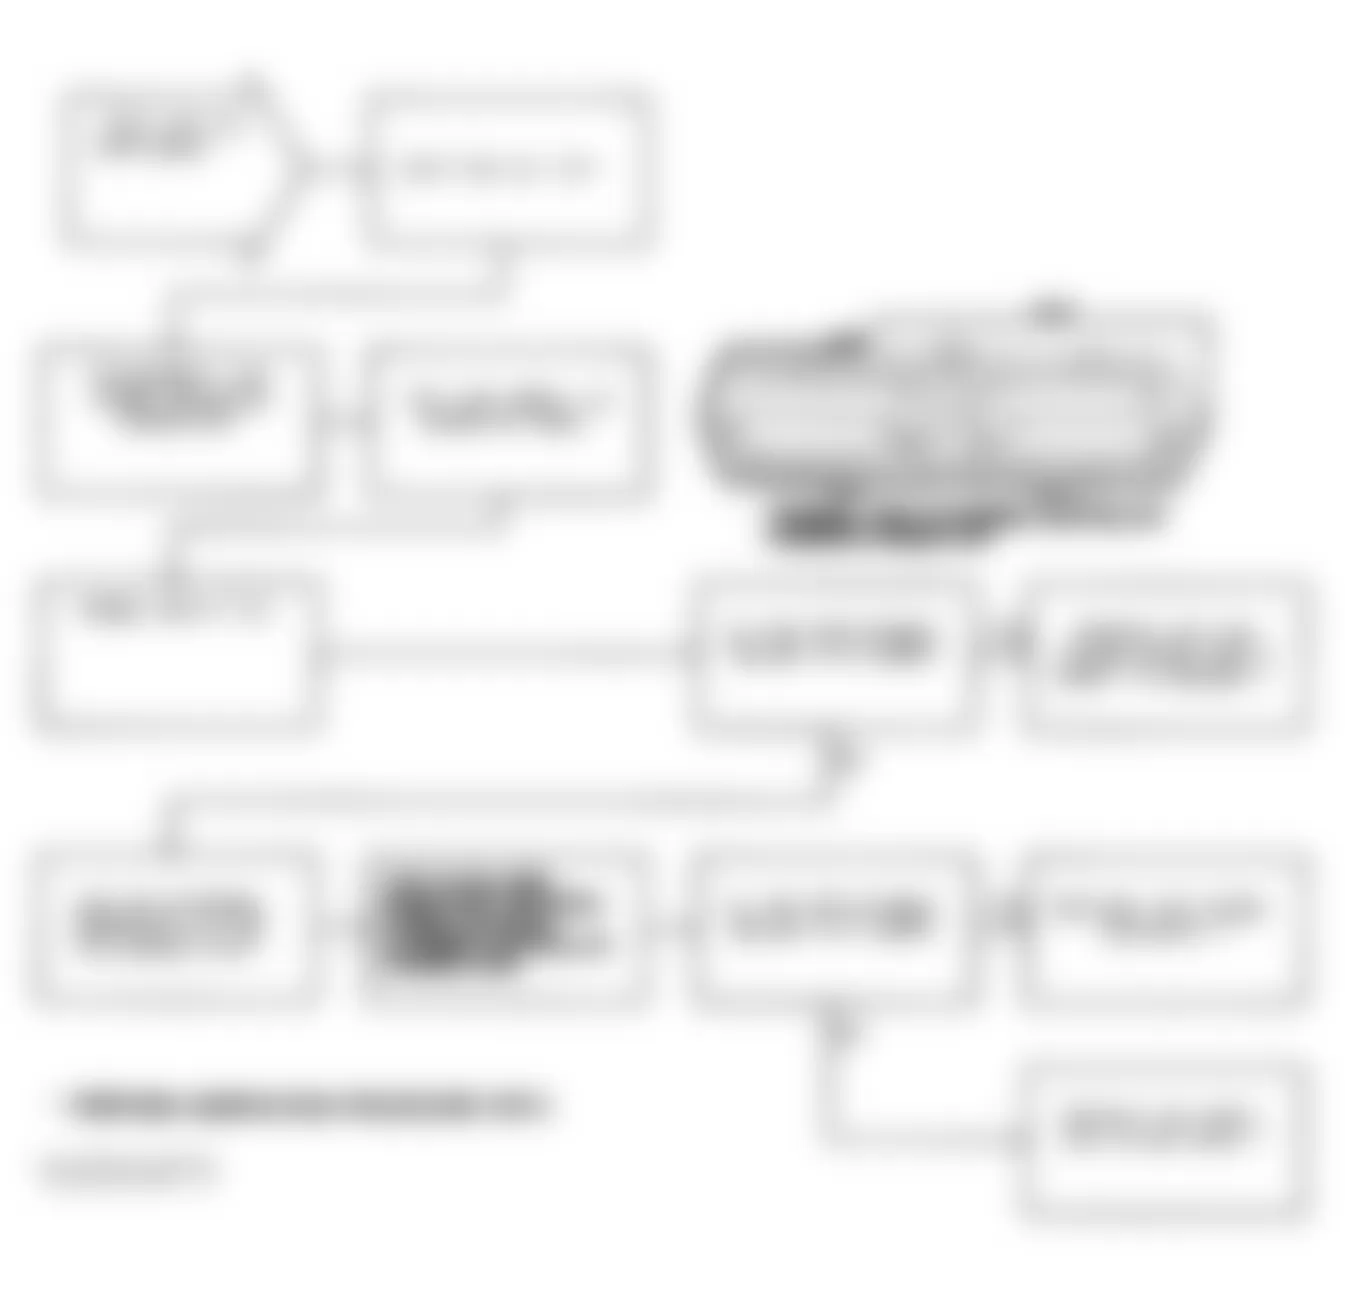 Chrysler Imperial 1991 - Component Locations -  Test DR-21A Code 31: Flowchart (3 of 3)